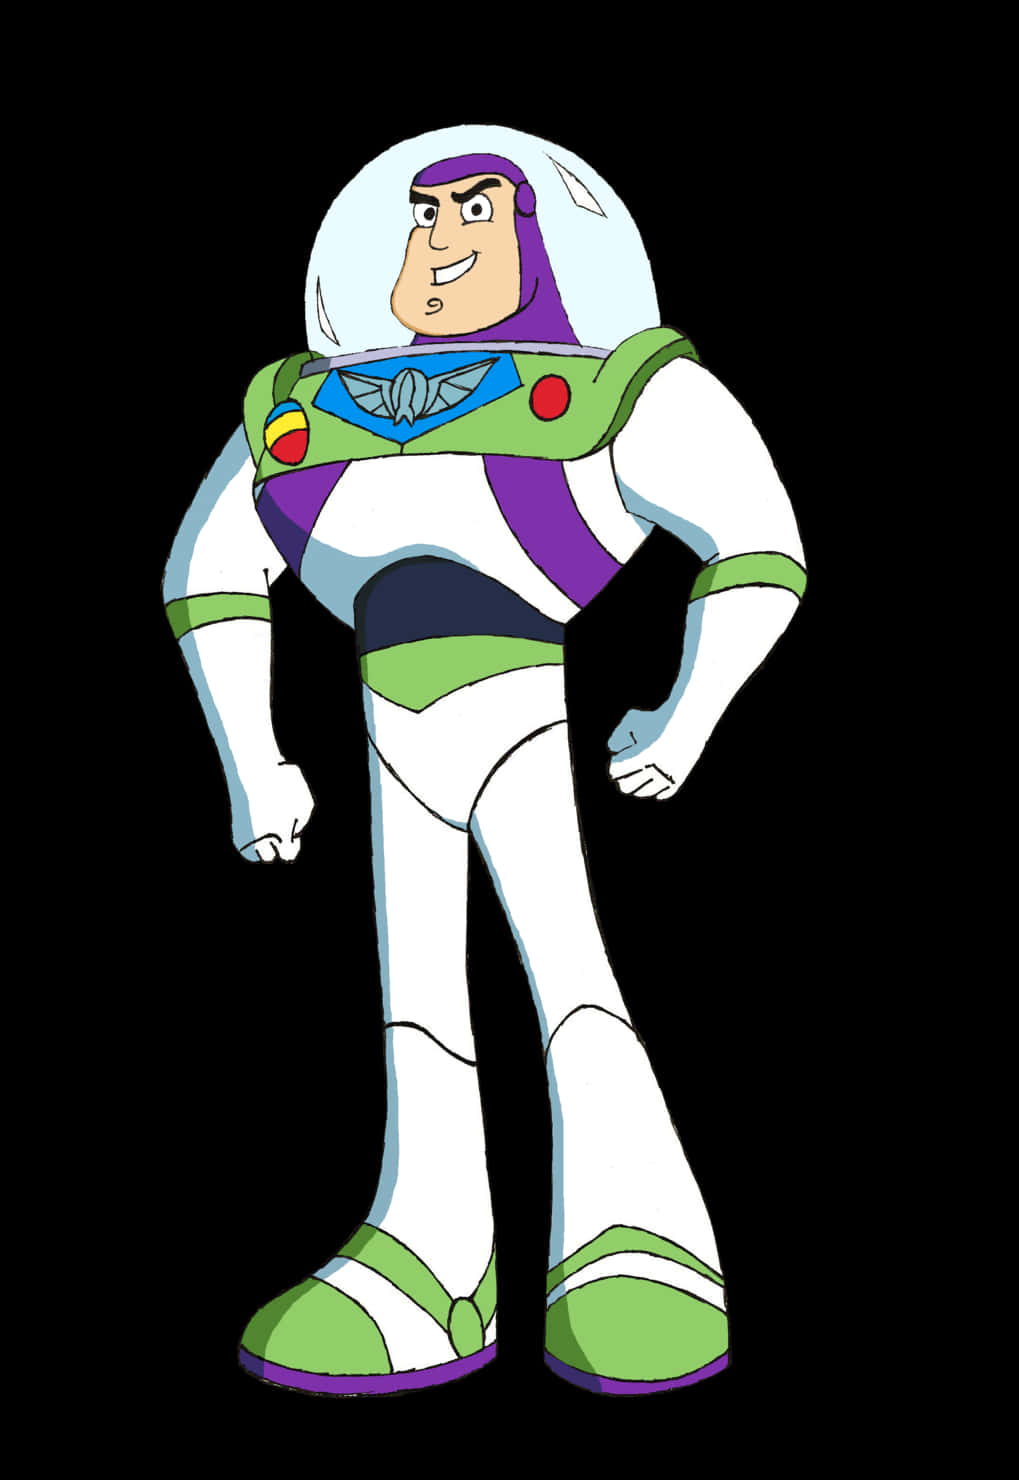 Buzz Lightyear Standing Pose PNG